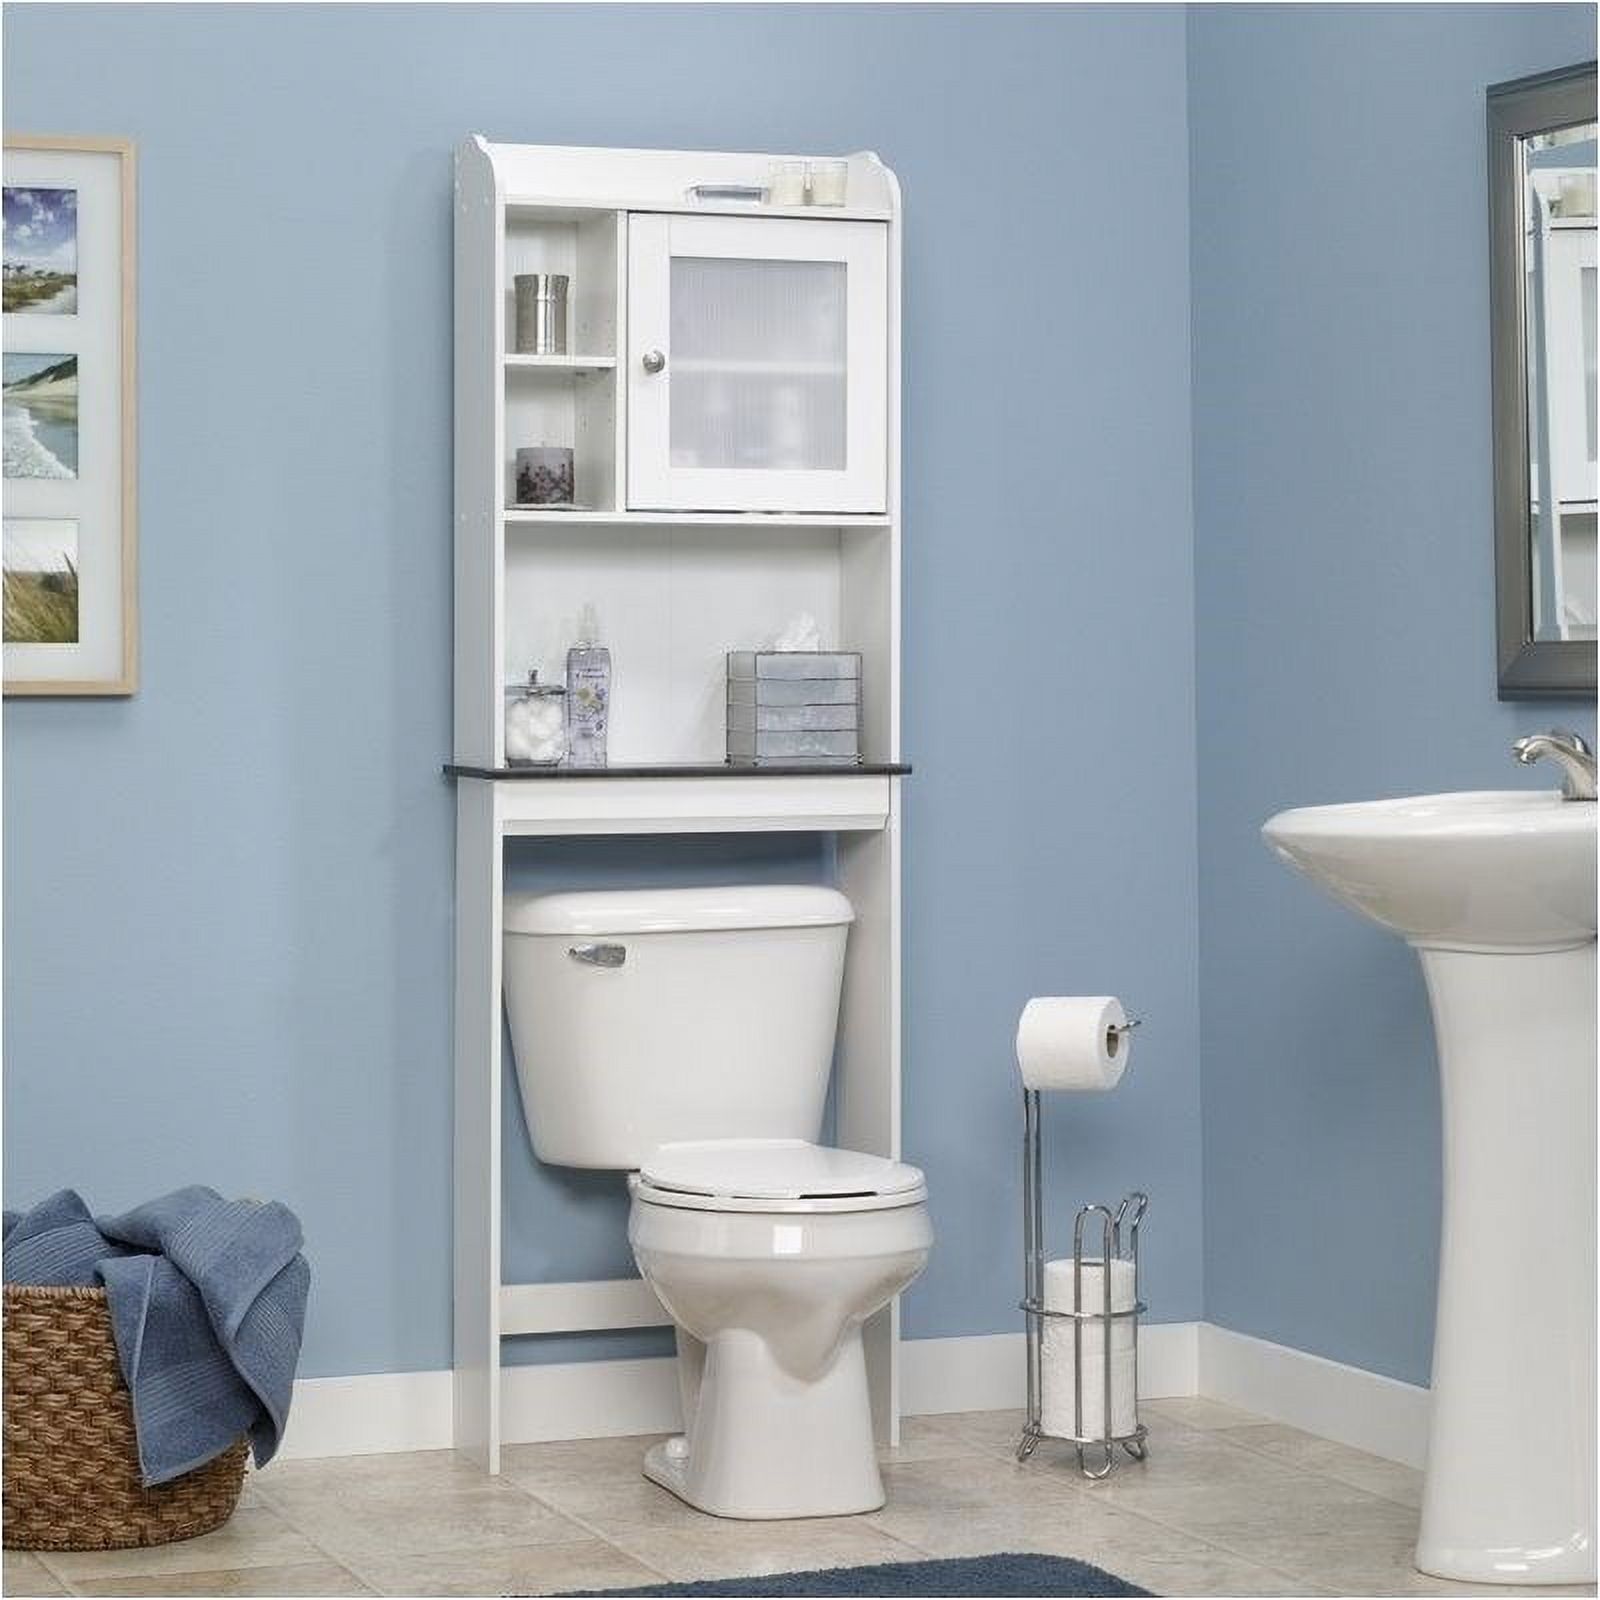 Pemberly Row Over-the-Toilet Etagere, Space-Saver Bathroom Cabinet with Adjustable Shelf in Soft White - image 1 of 4